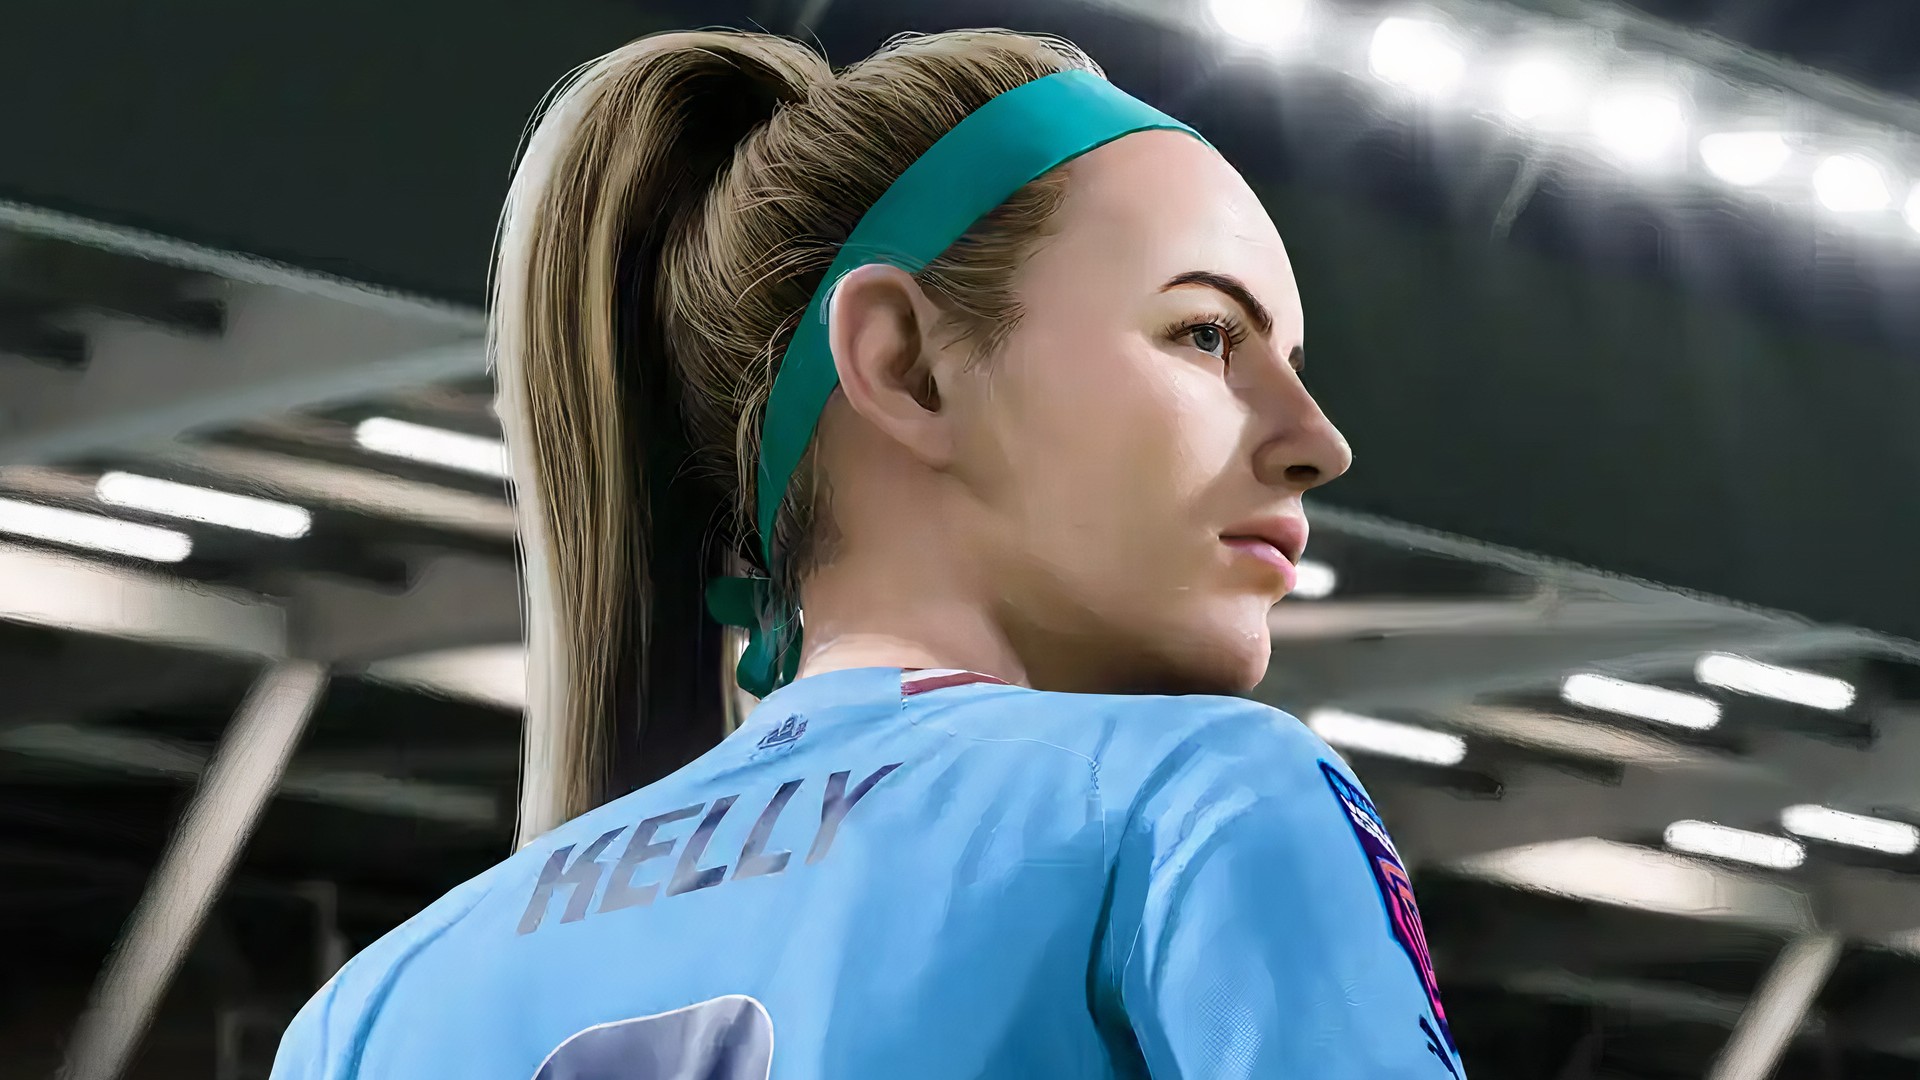 FIFA 23 bug is a glitchy victory for football game equality